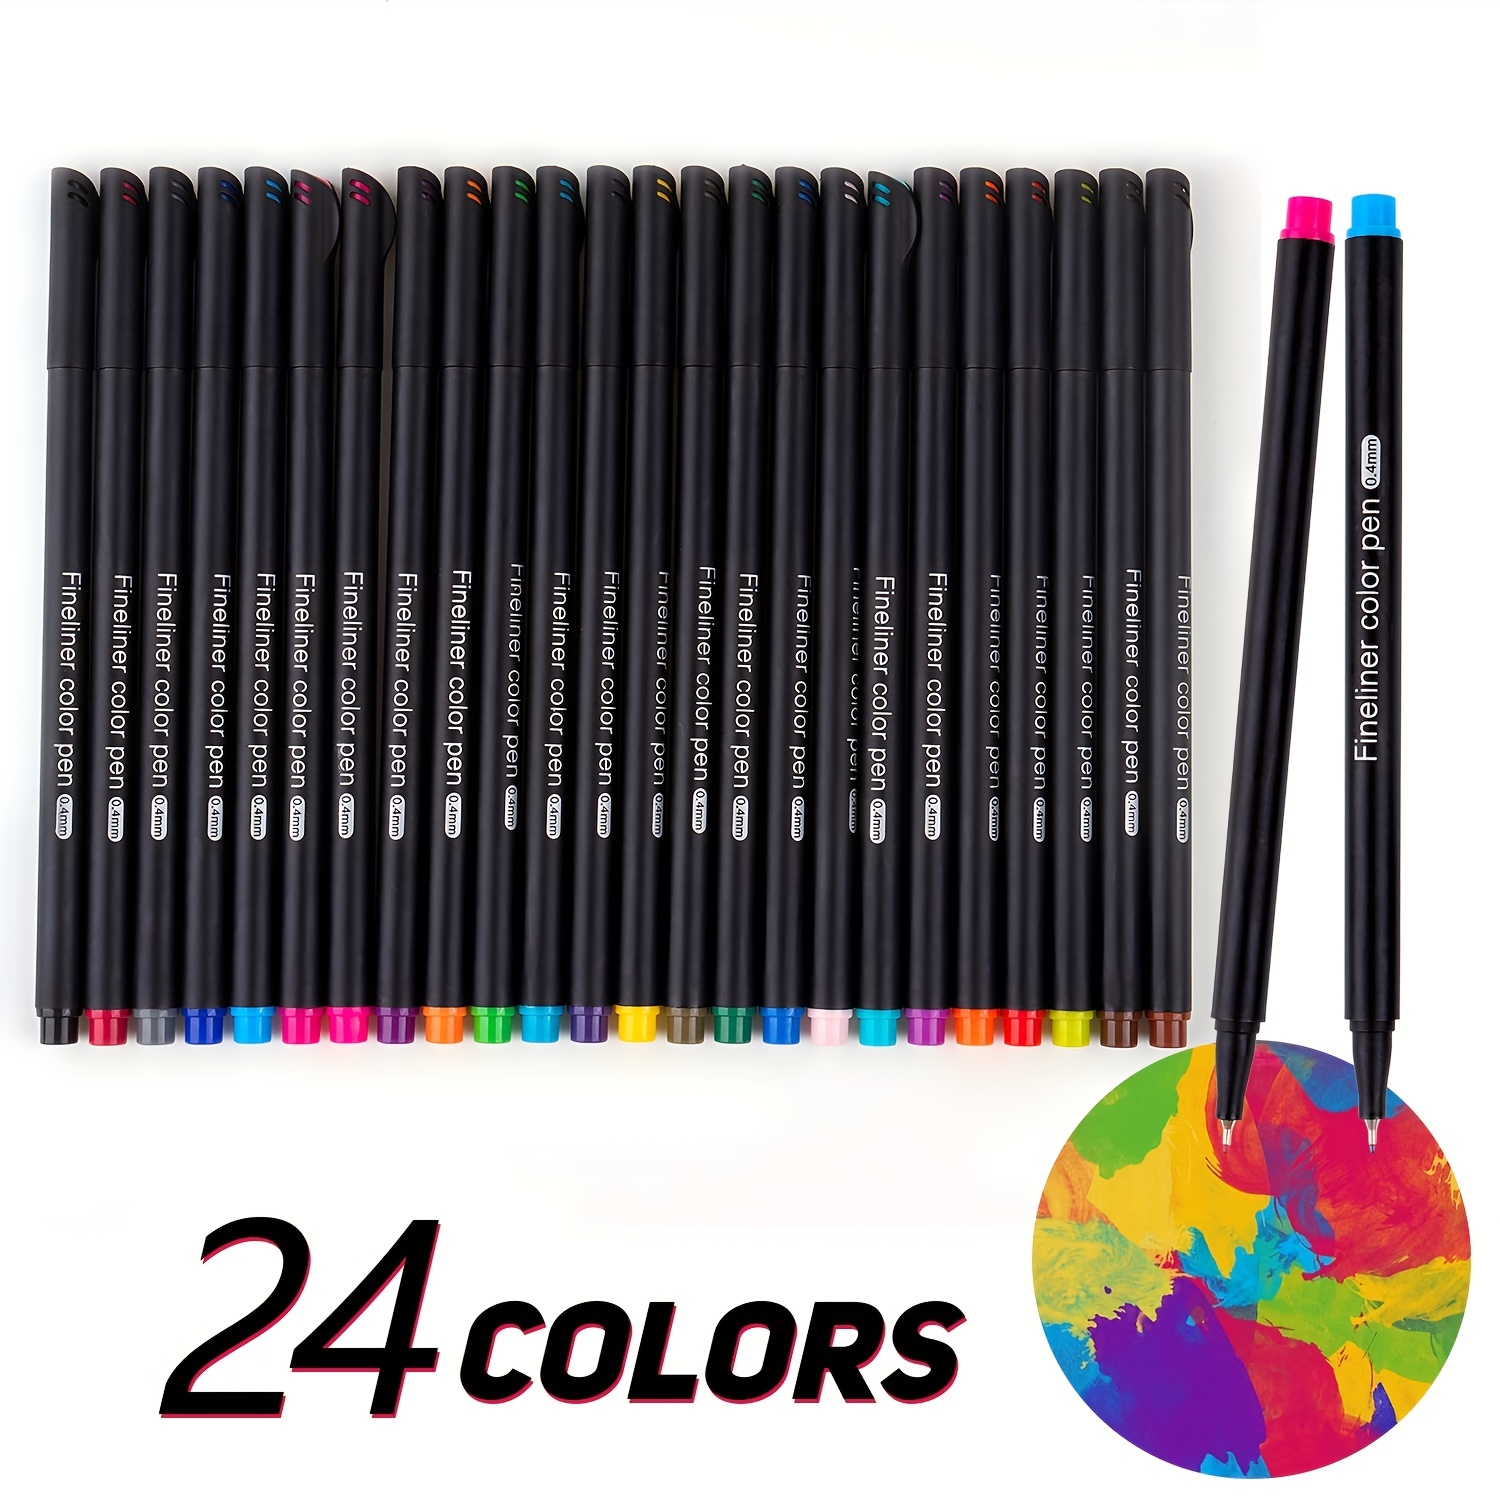 Shuttle Art Fineliner Pens, 100 Colors 0.4mm Fineliner Color Pen Set Fine  Line Drawing Pen Fine Point Markers Perfect for Adult Coloring Books  Drawing